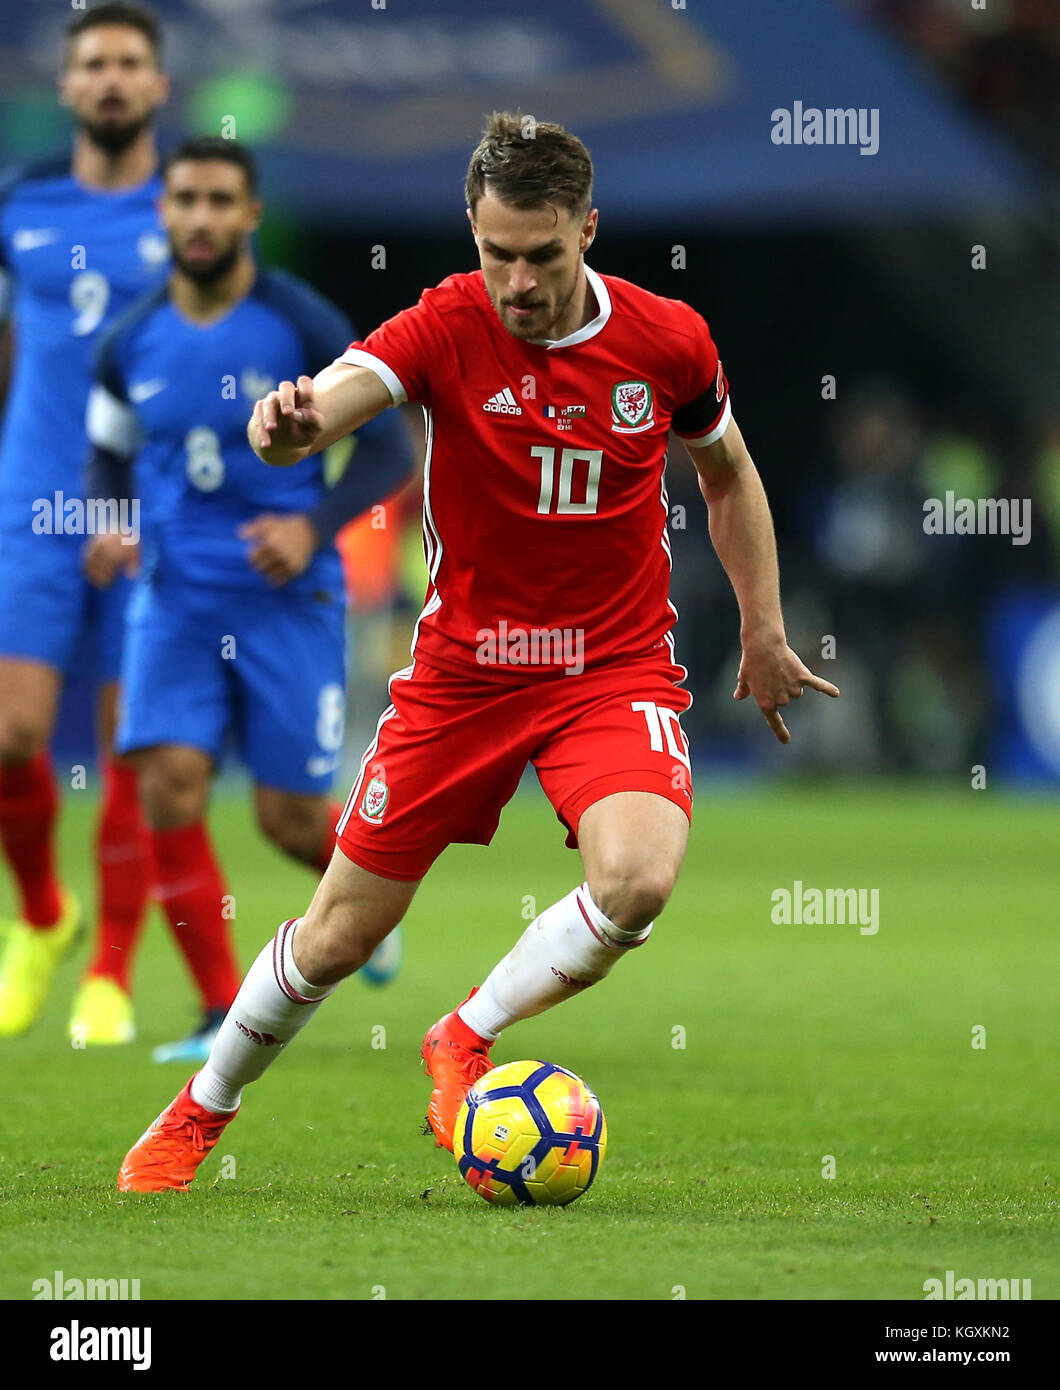 Wales' Aaron Ramsey during the International Friendly match at the Stade de France, Paris. PRESS ASSOCIATION Photo. Picture date: Friday November 10, 2017. See PA story SOCCER France. Photo credit should read: Steven Paston/PA Wire. . Stock Photo